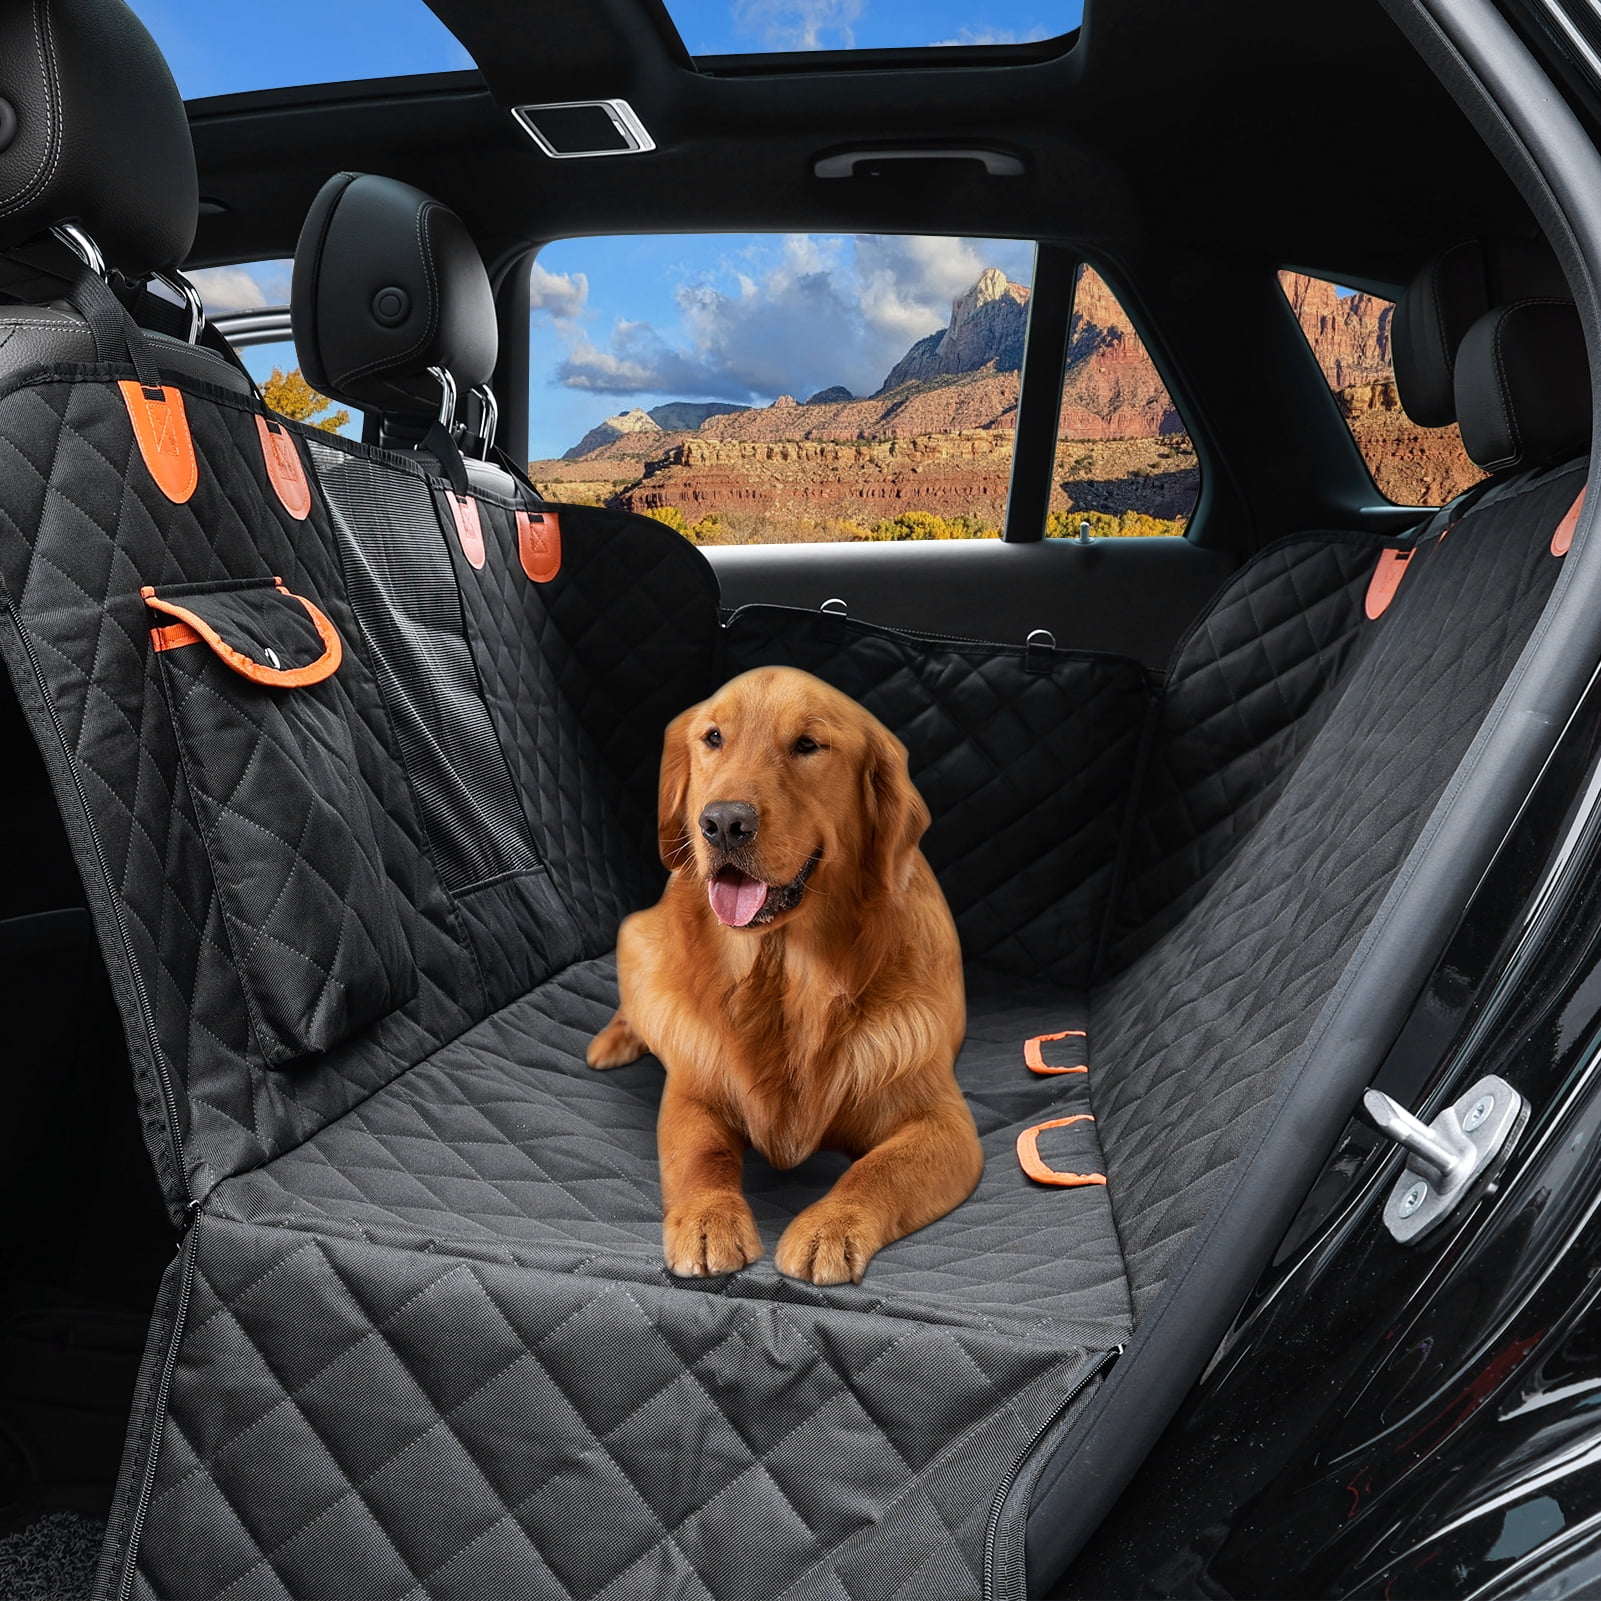 Dog Car Seat Cover for Back Seat, Durable Anti-Scratch Nonslip Waterproof Dog  Car Hammock with Mesh Window for Cars, SUVs & Trucks 